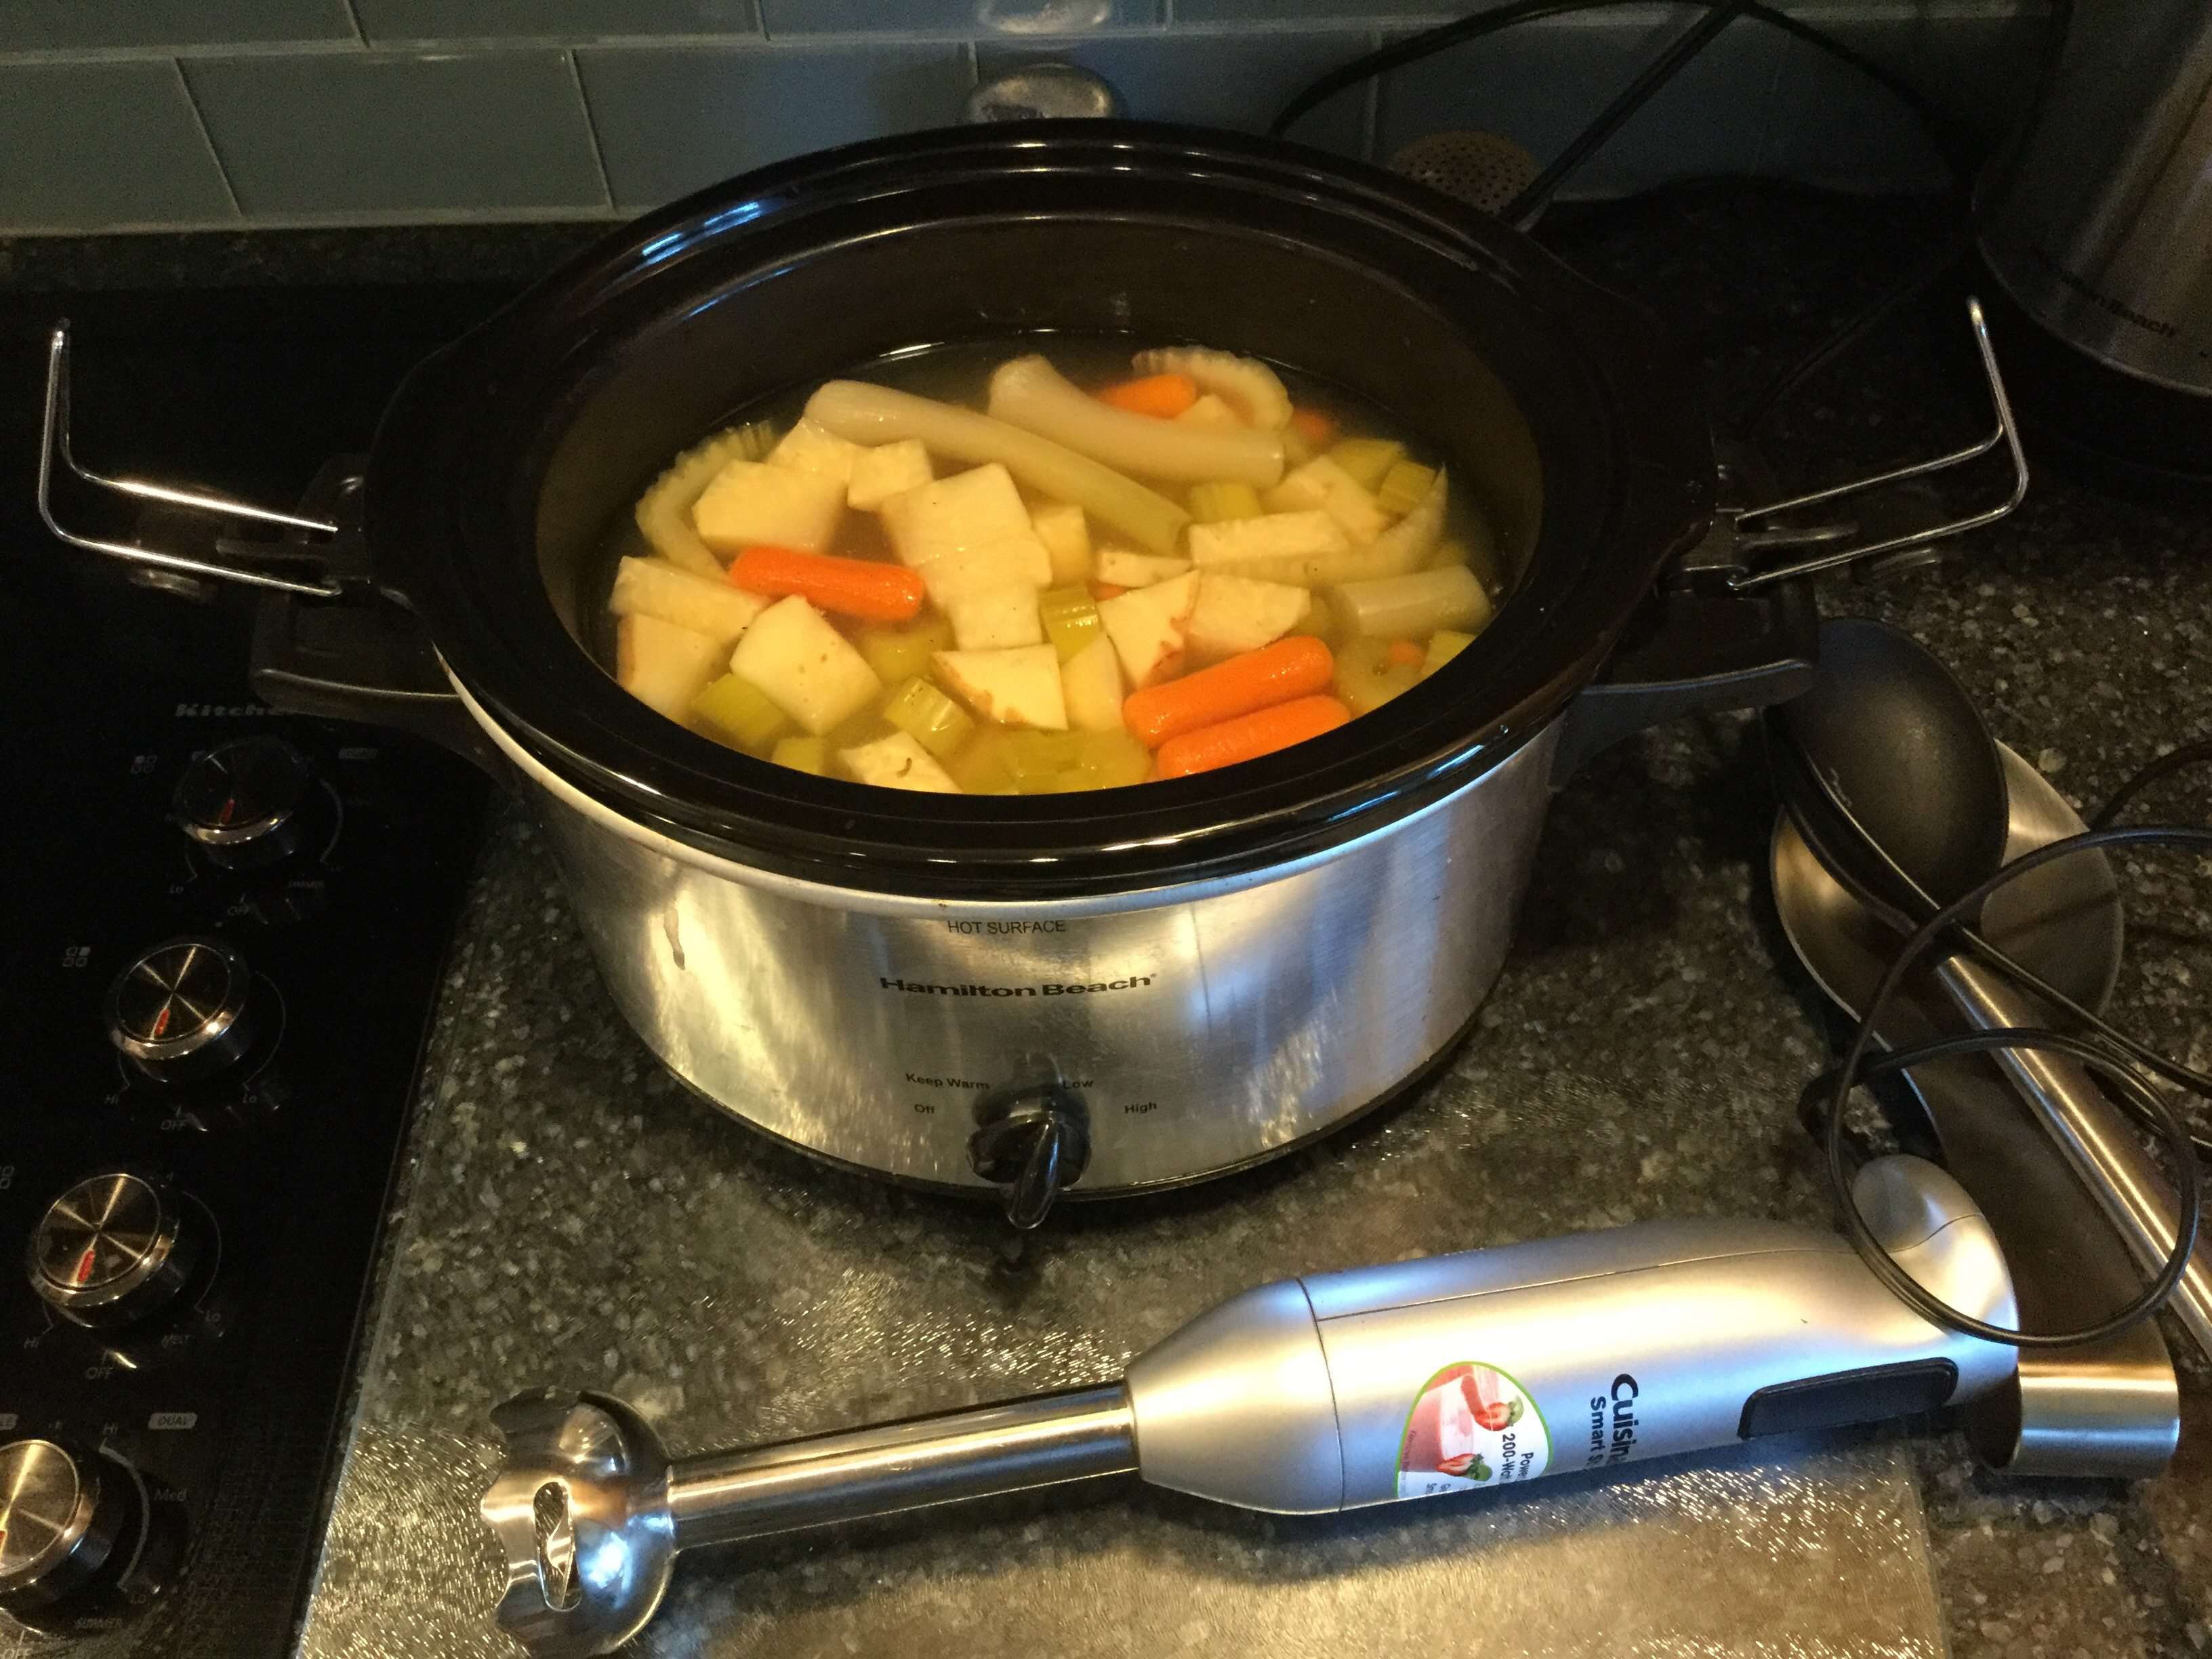 When the veggies are tender - use your wand blender or regular blender to puree the veggies into the soup.